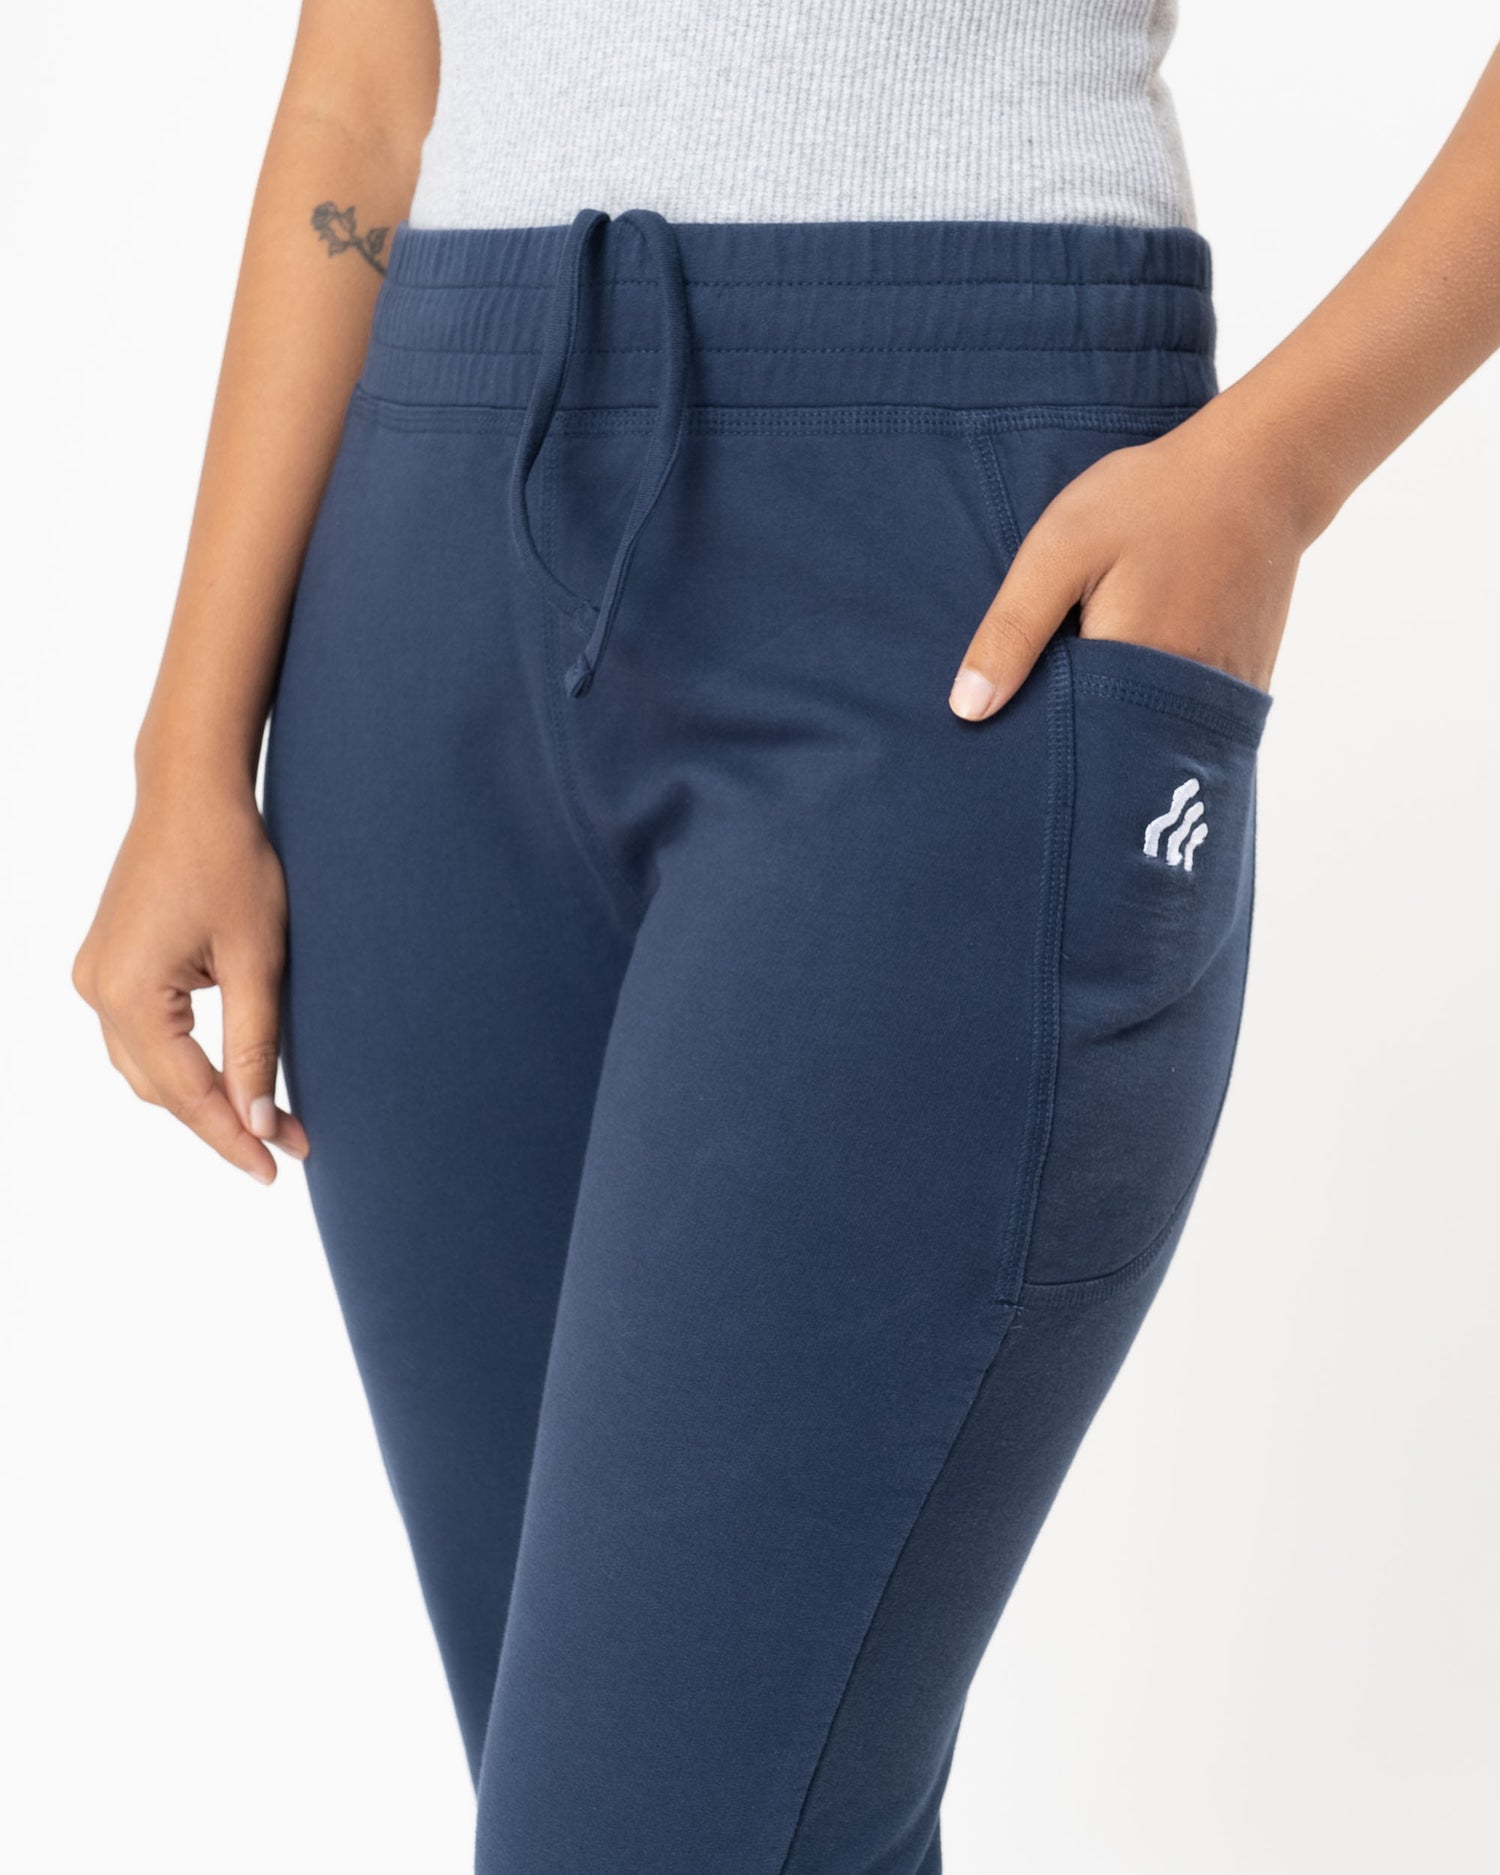 MOTHER | Navy blue Women's Casual Pants | YOOX